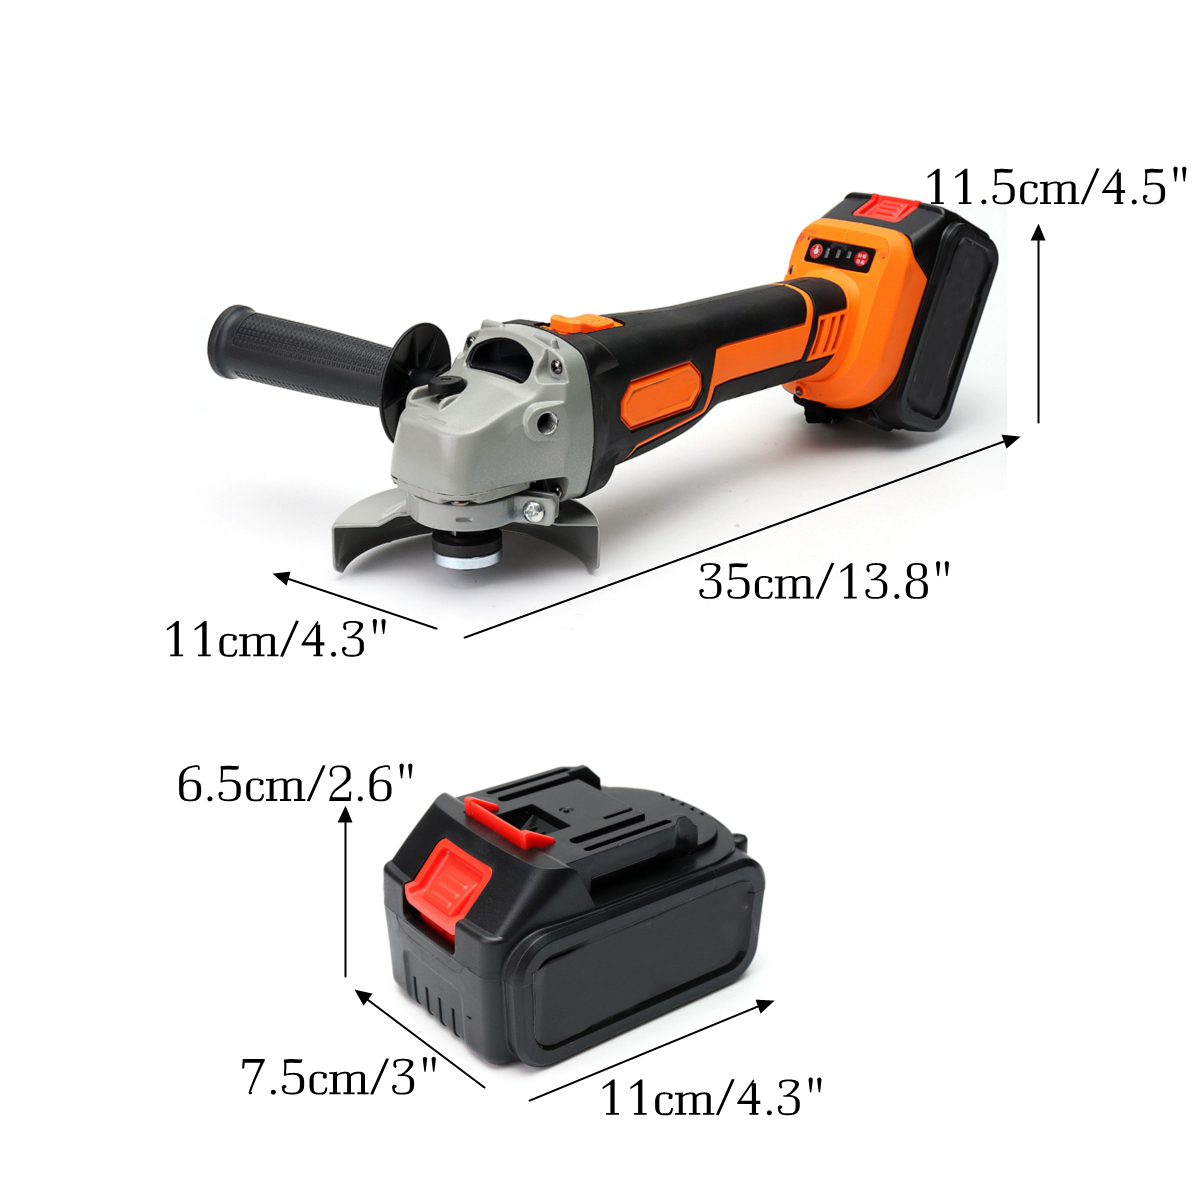 21800mah29800mah-Electric-Angle-Grinder-Lithium-Ion-Battery-Cut-Off-ToolGrinder-Cordless-Polisher-Po-1424117-3